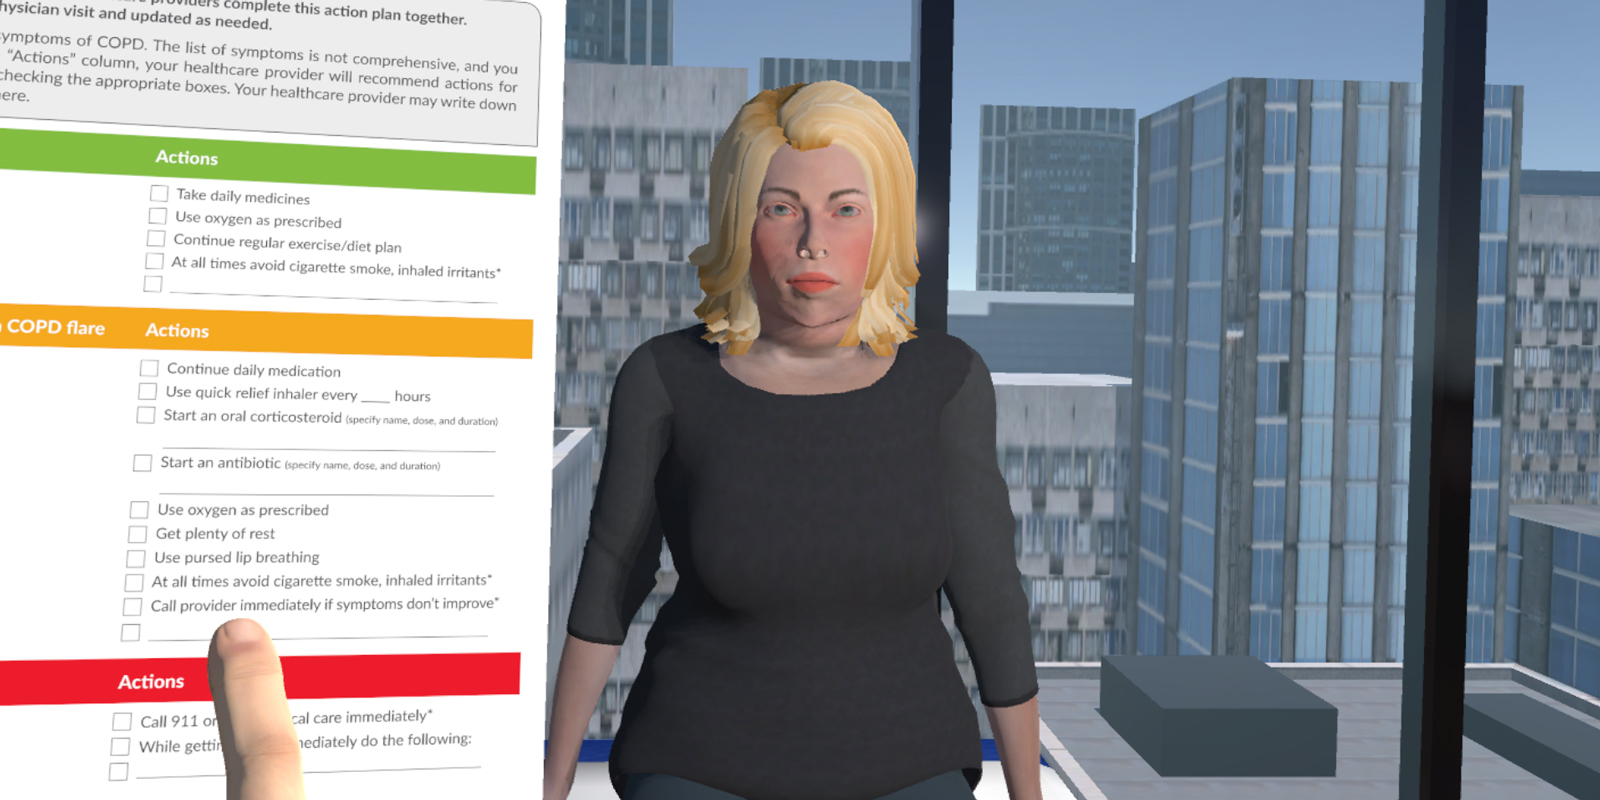 The CSUSB xREAL used artificial intelligence to animate avatars for an experience that allows nursing students to practice interacting with patients.